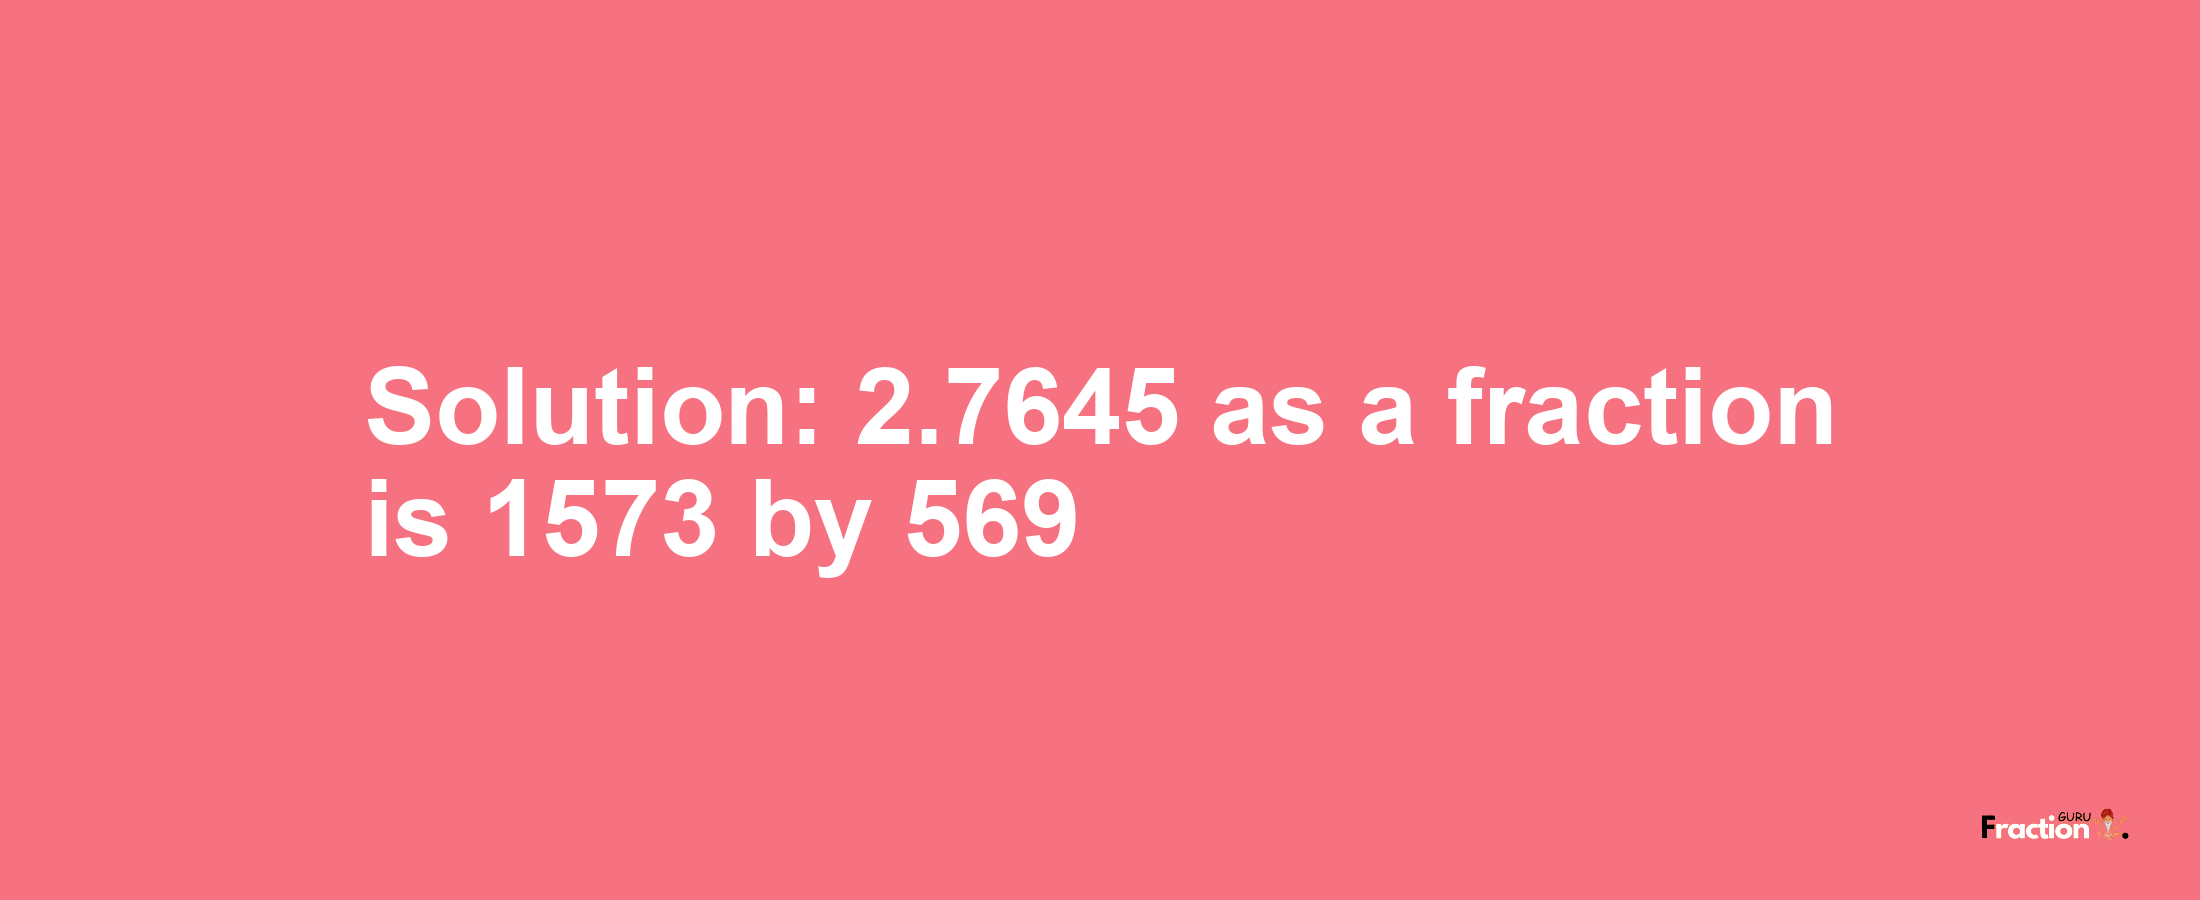 Solution:2.7645 as a fraction is 1573/569